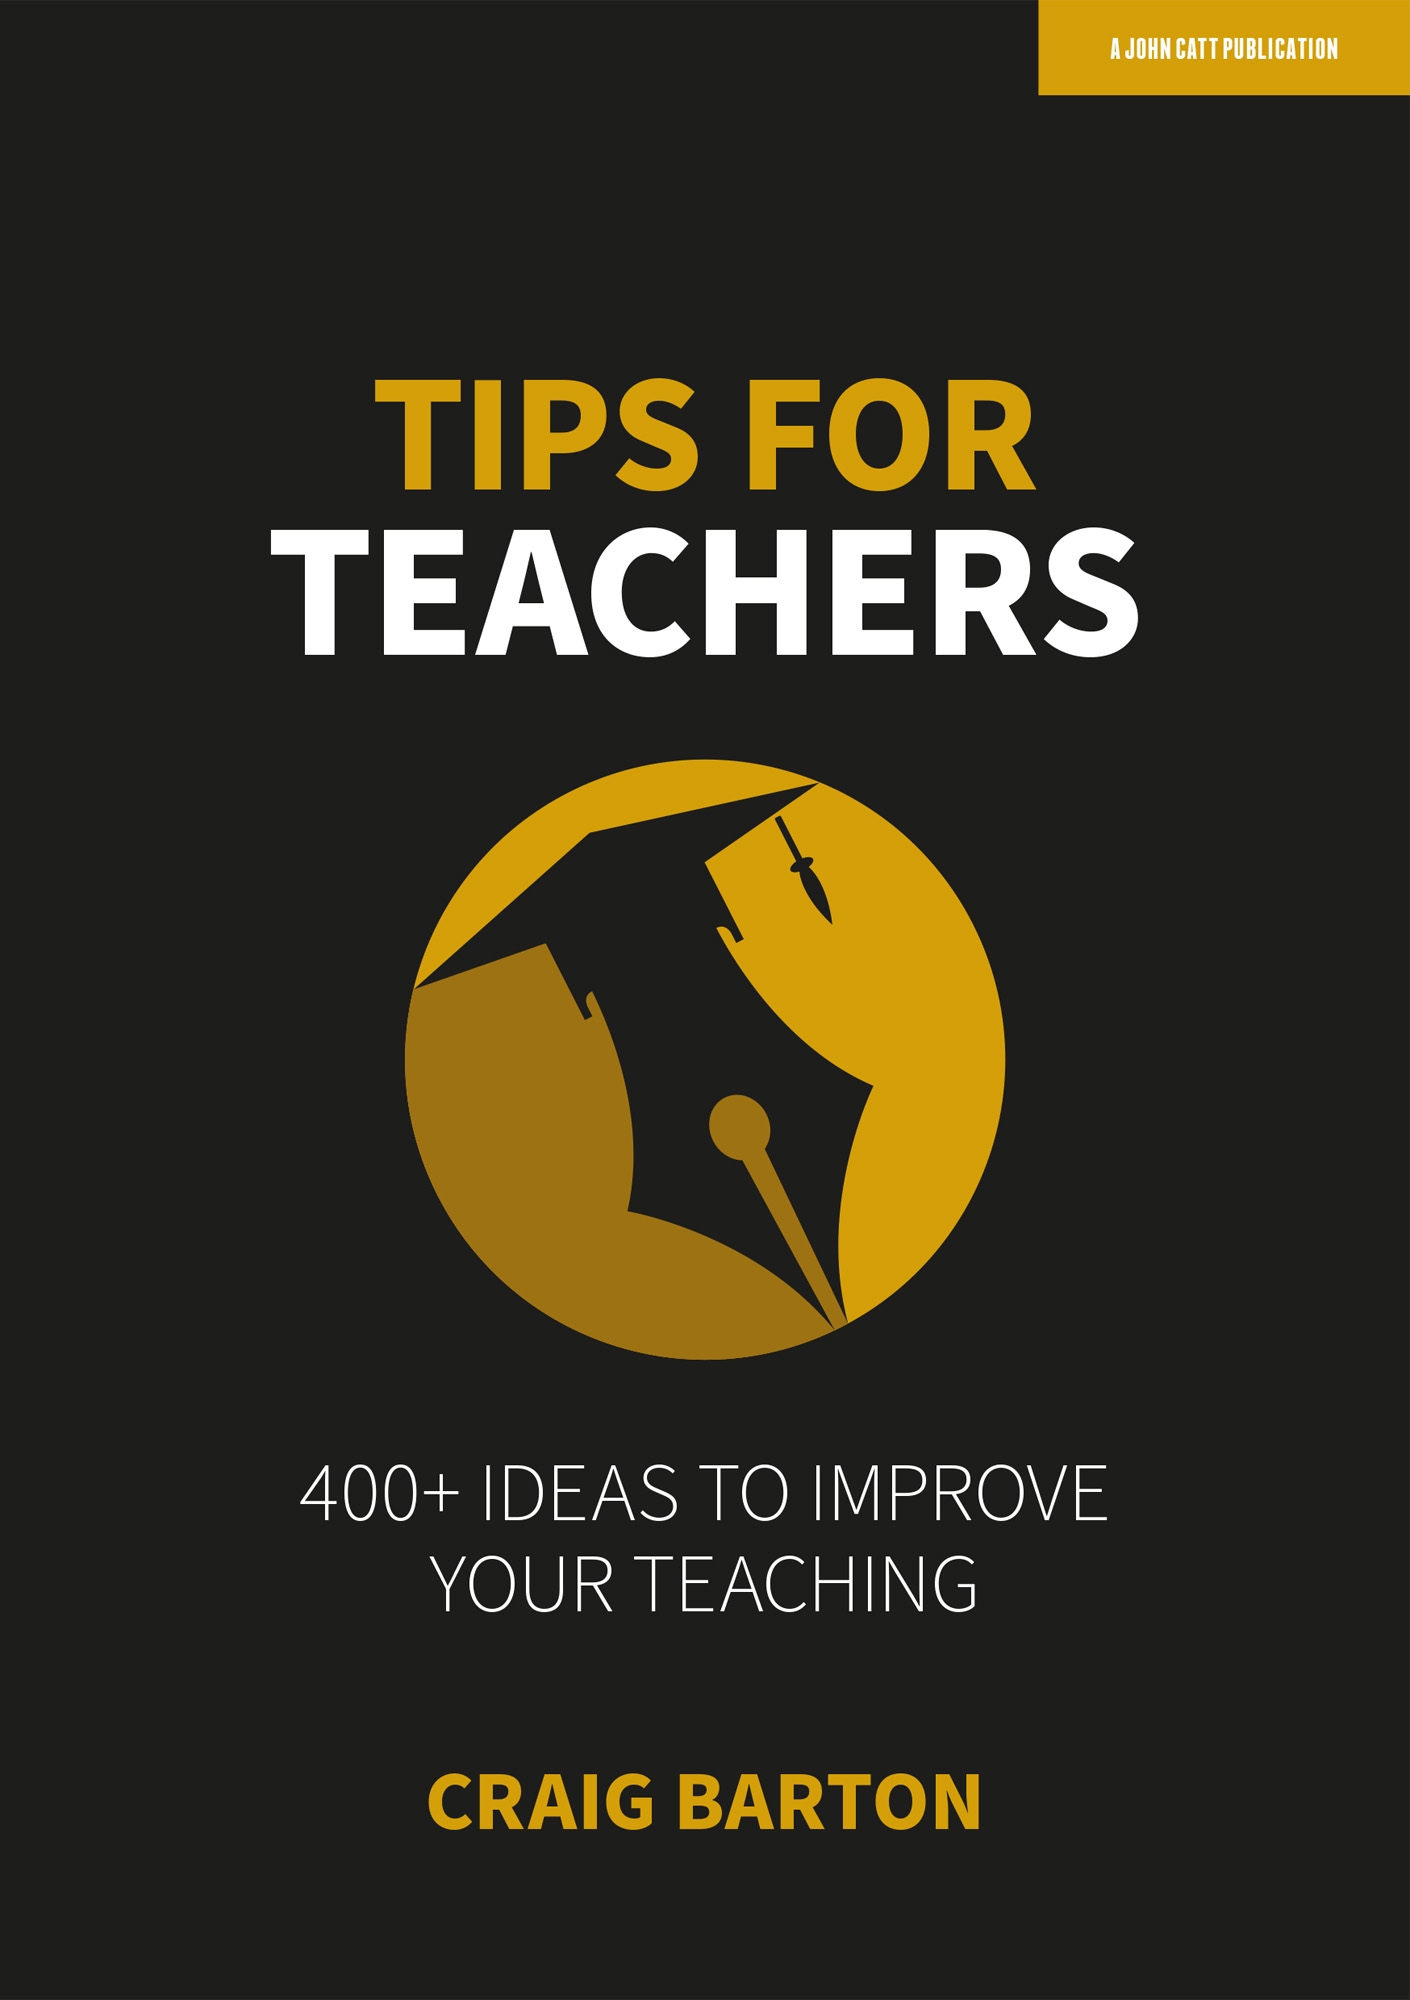 Featured image for “Tips for Teachers: 400+ ideas to improve your teaching”